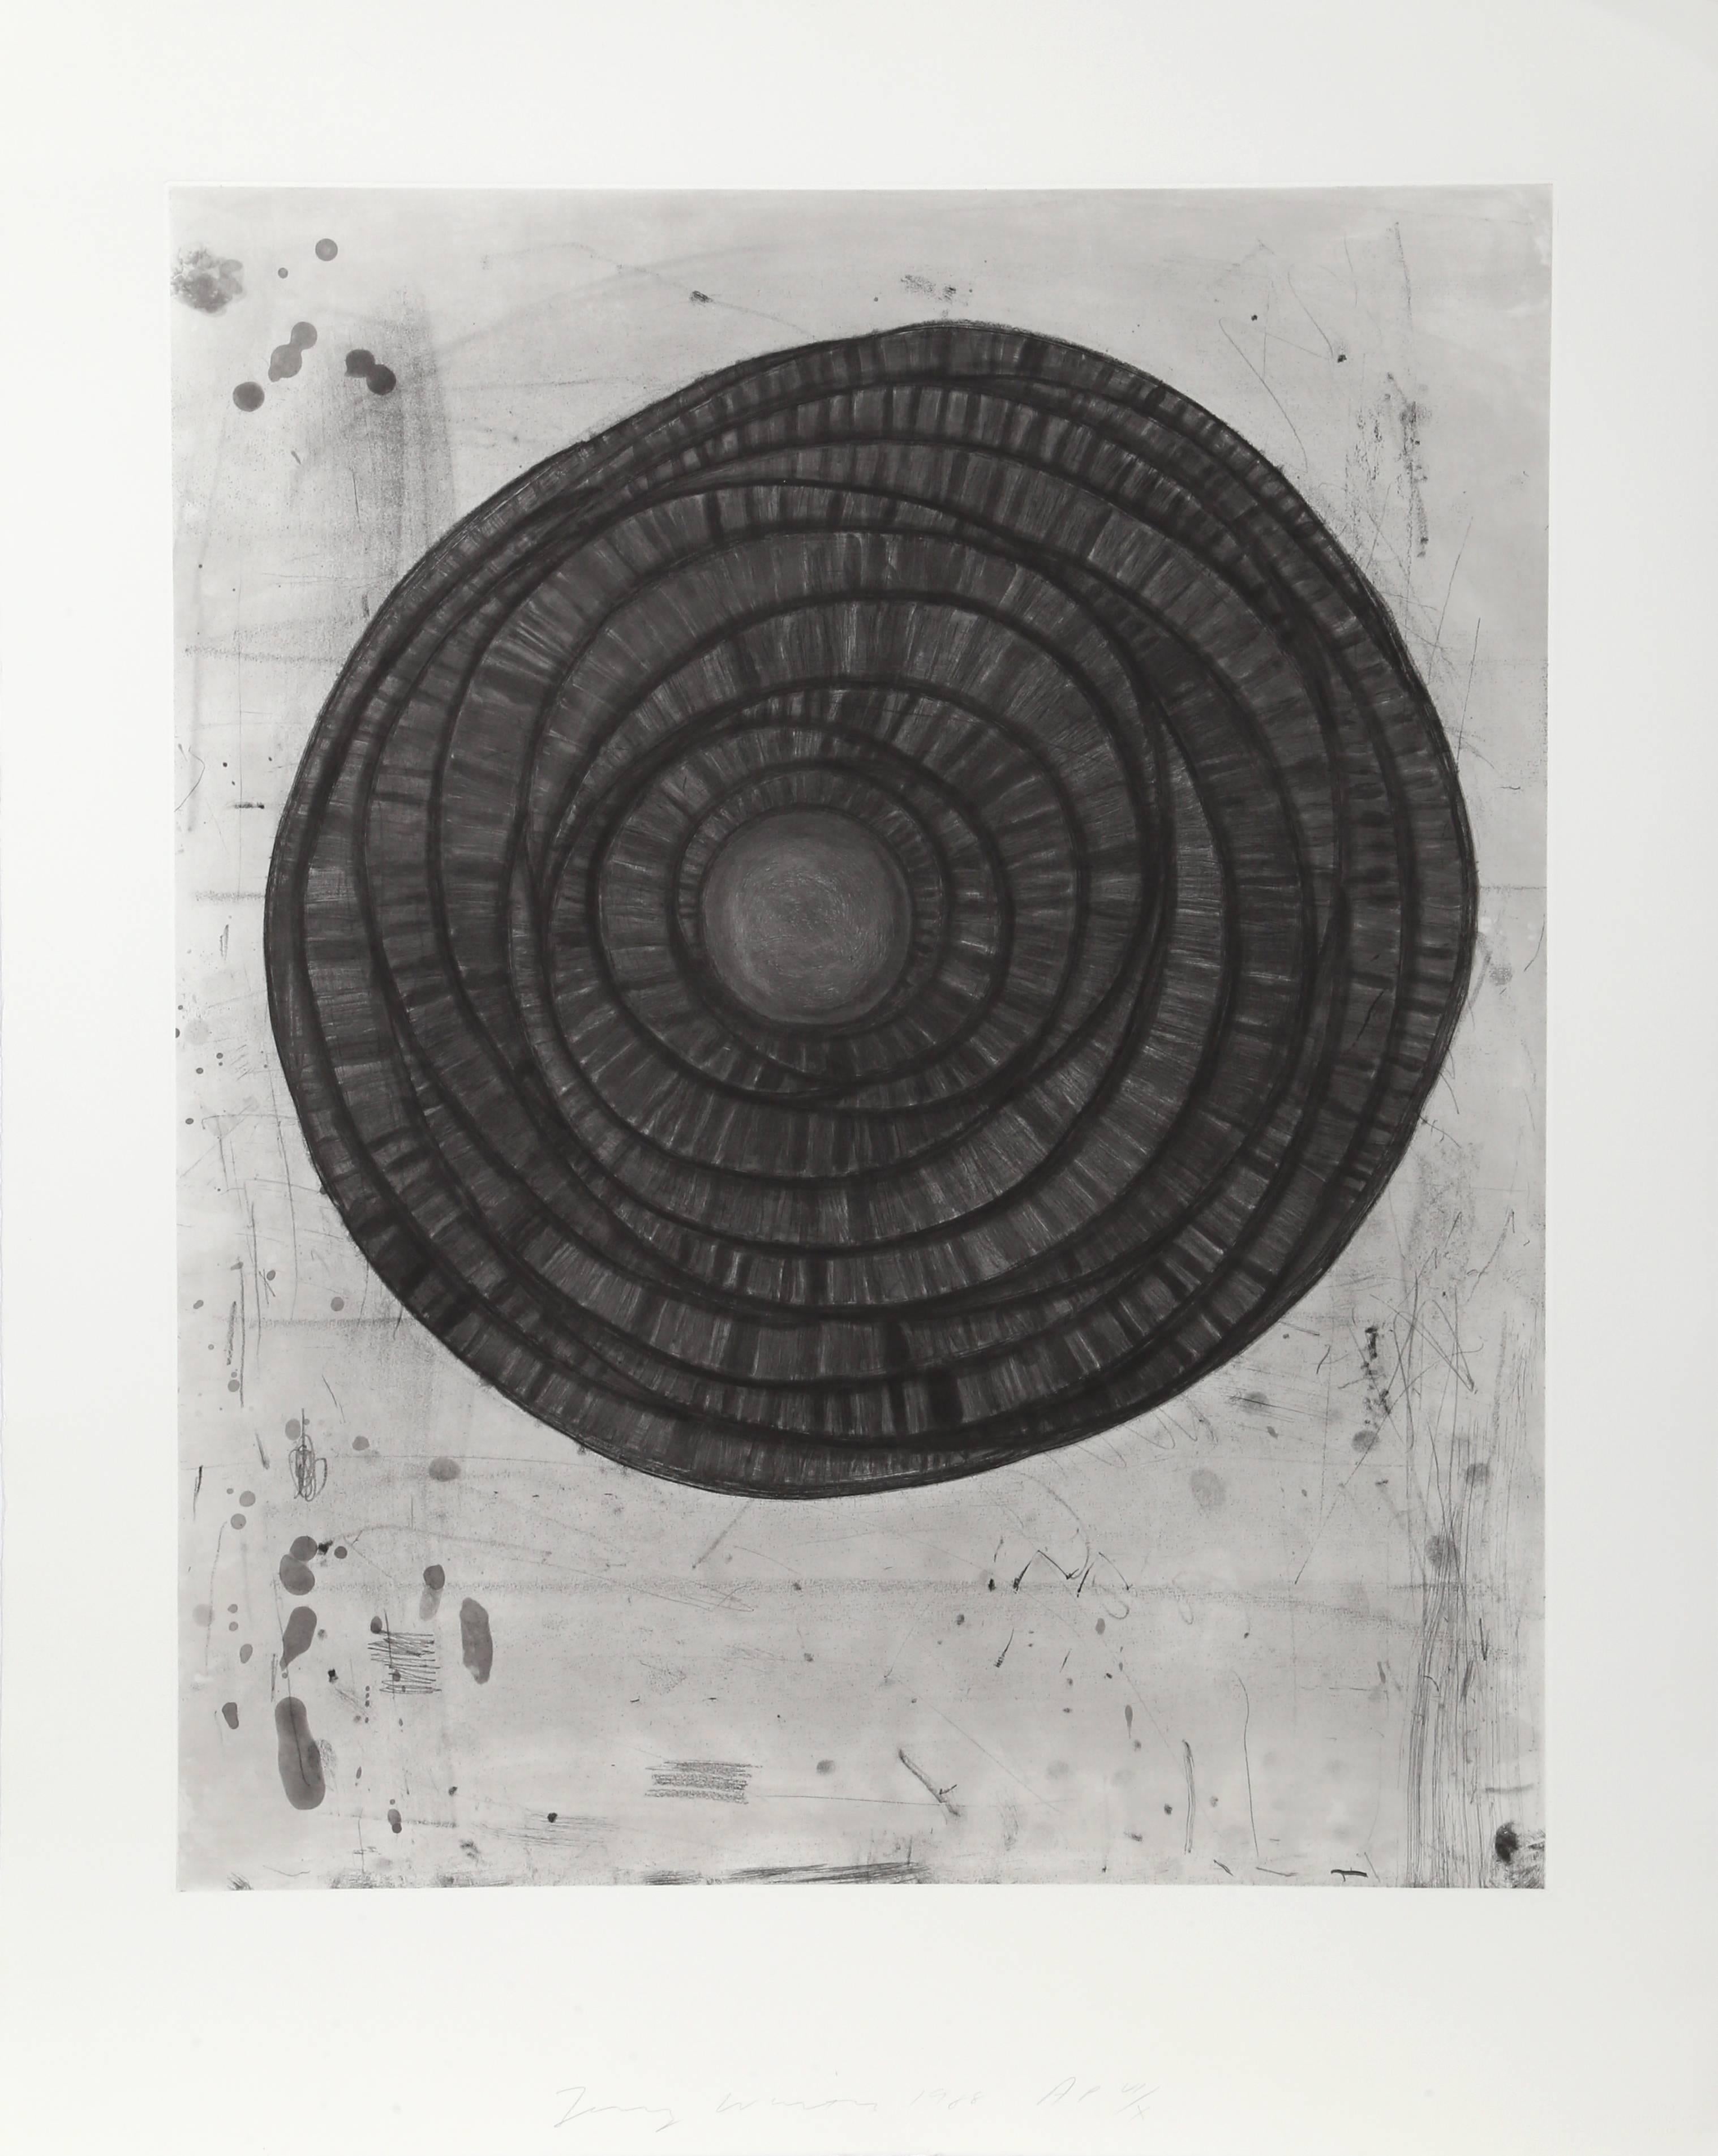 No. 1, Large Abstract Aquatint Etching by Terry Winters